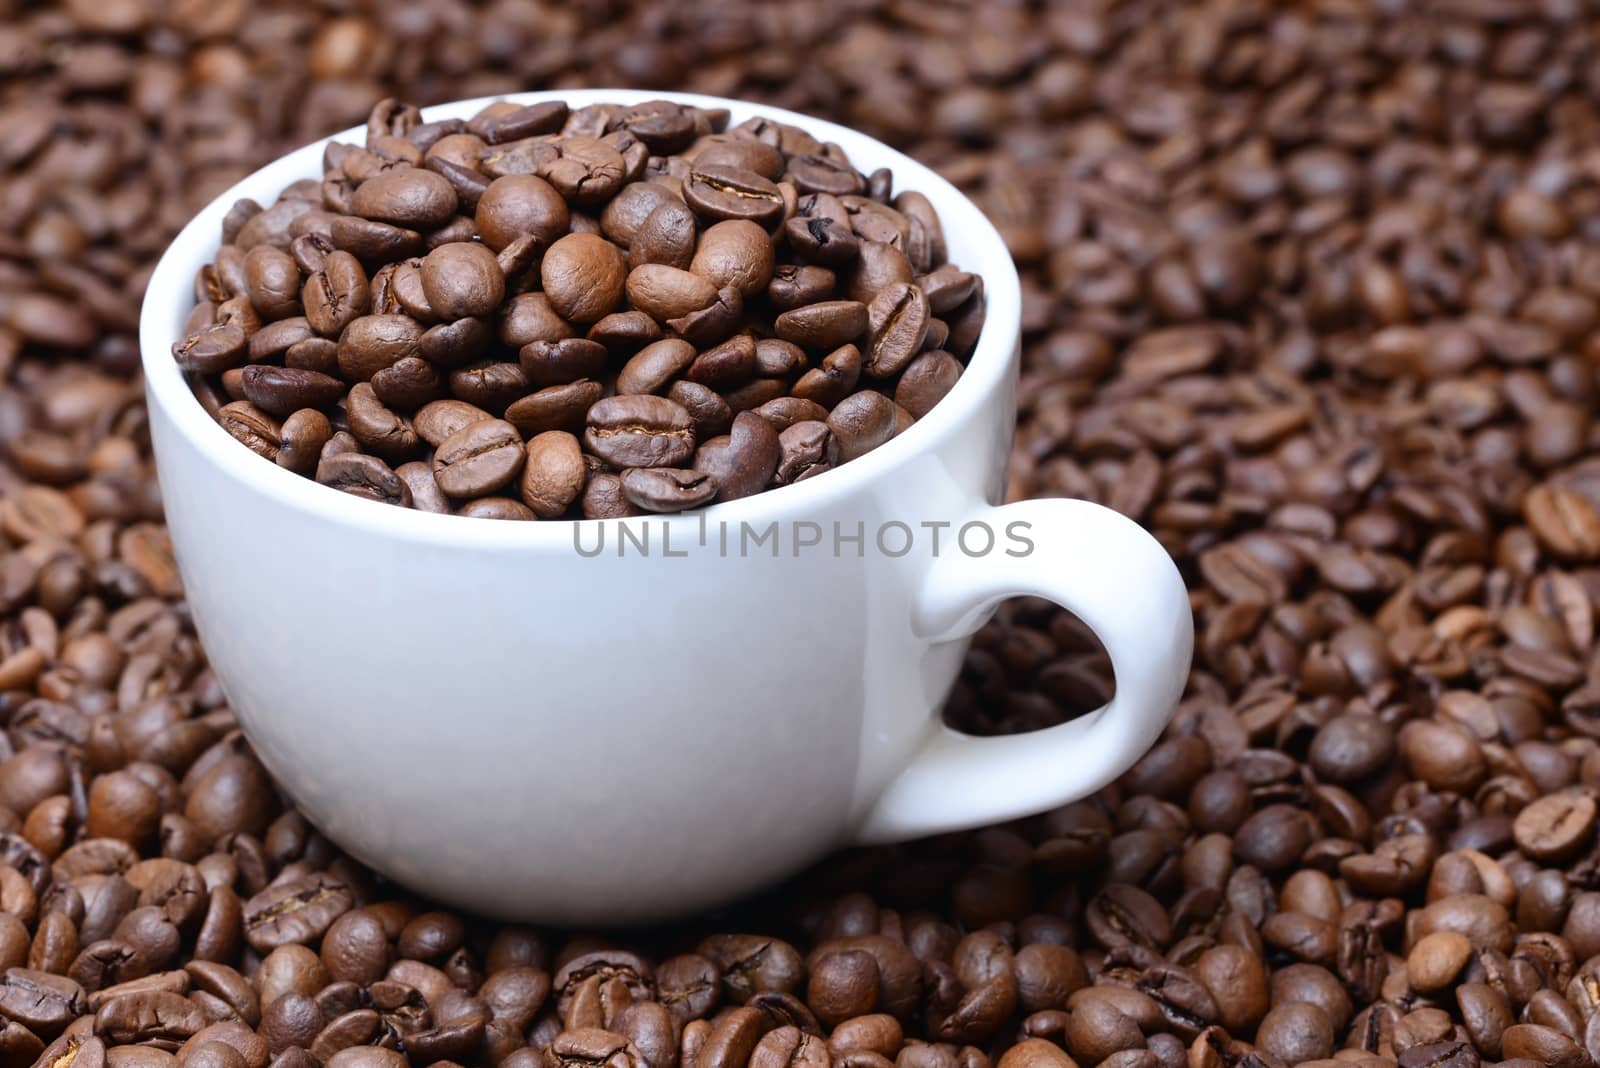 Photo of a cup of coffee with coffee grains. White color cup on a brown coffee beans background. Food photography.